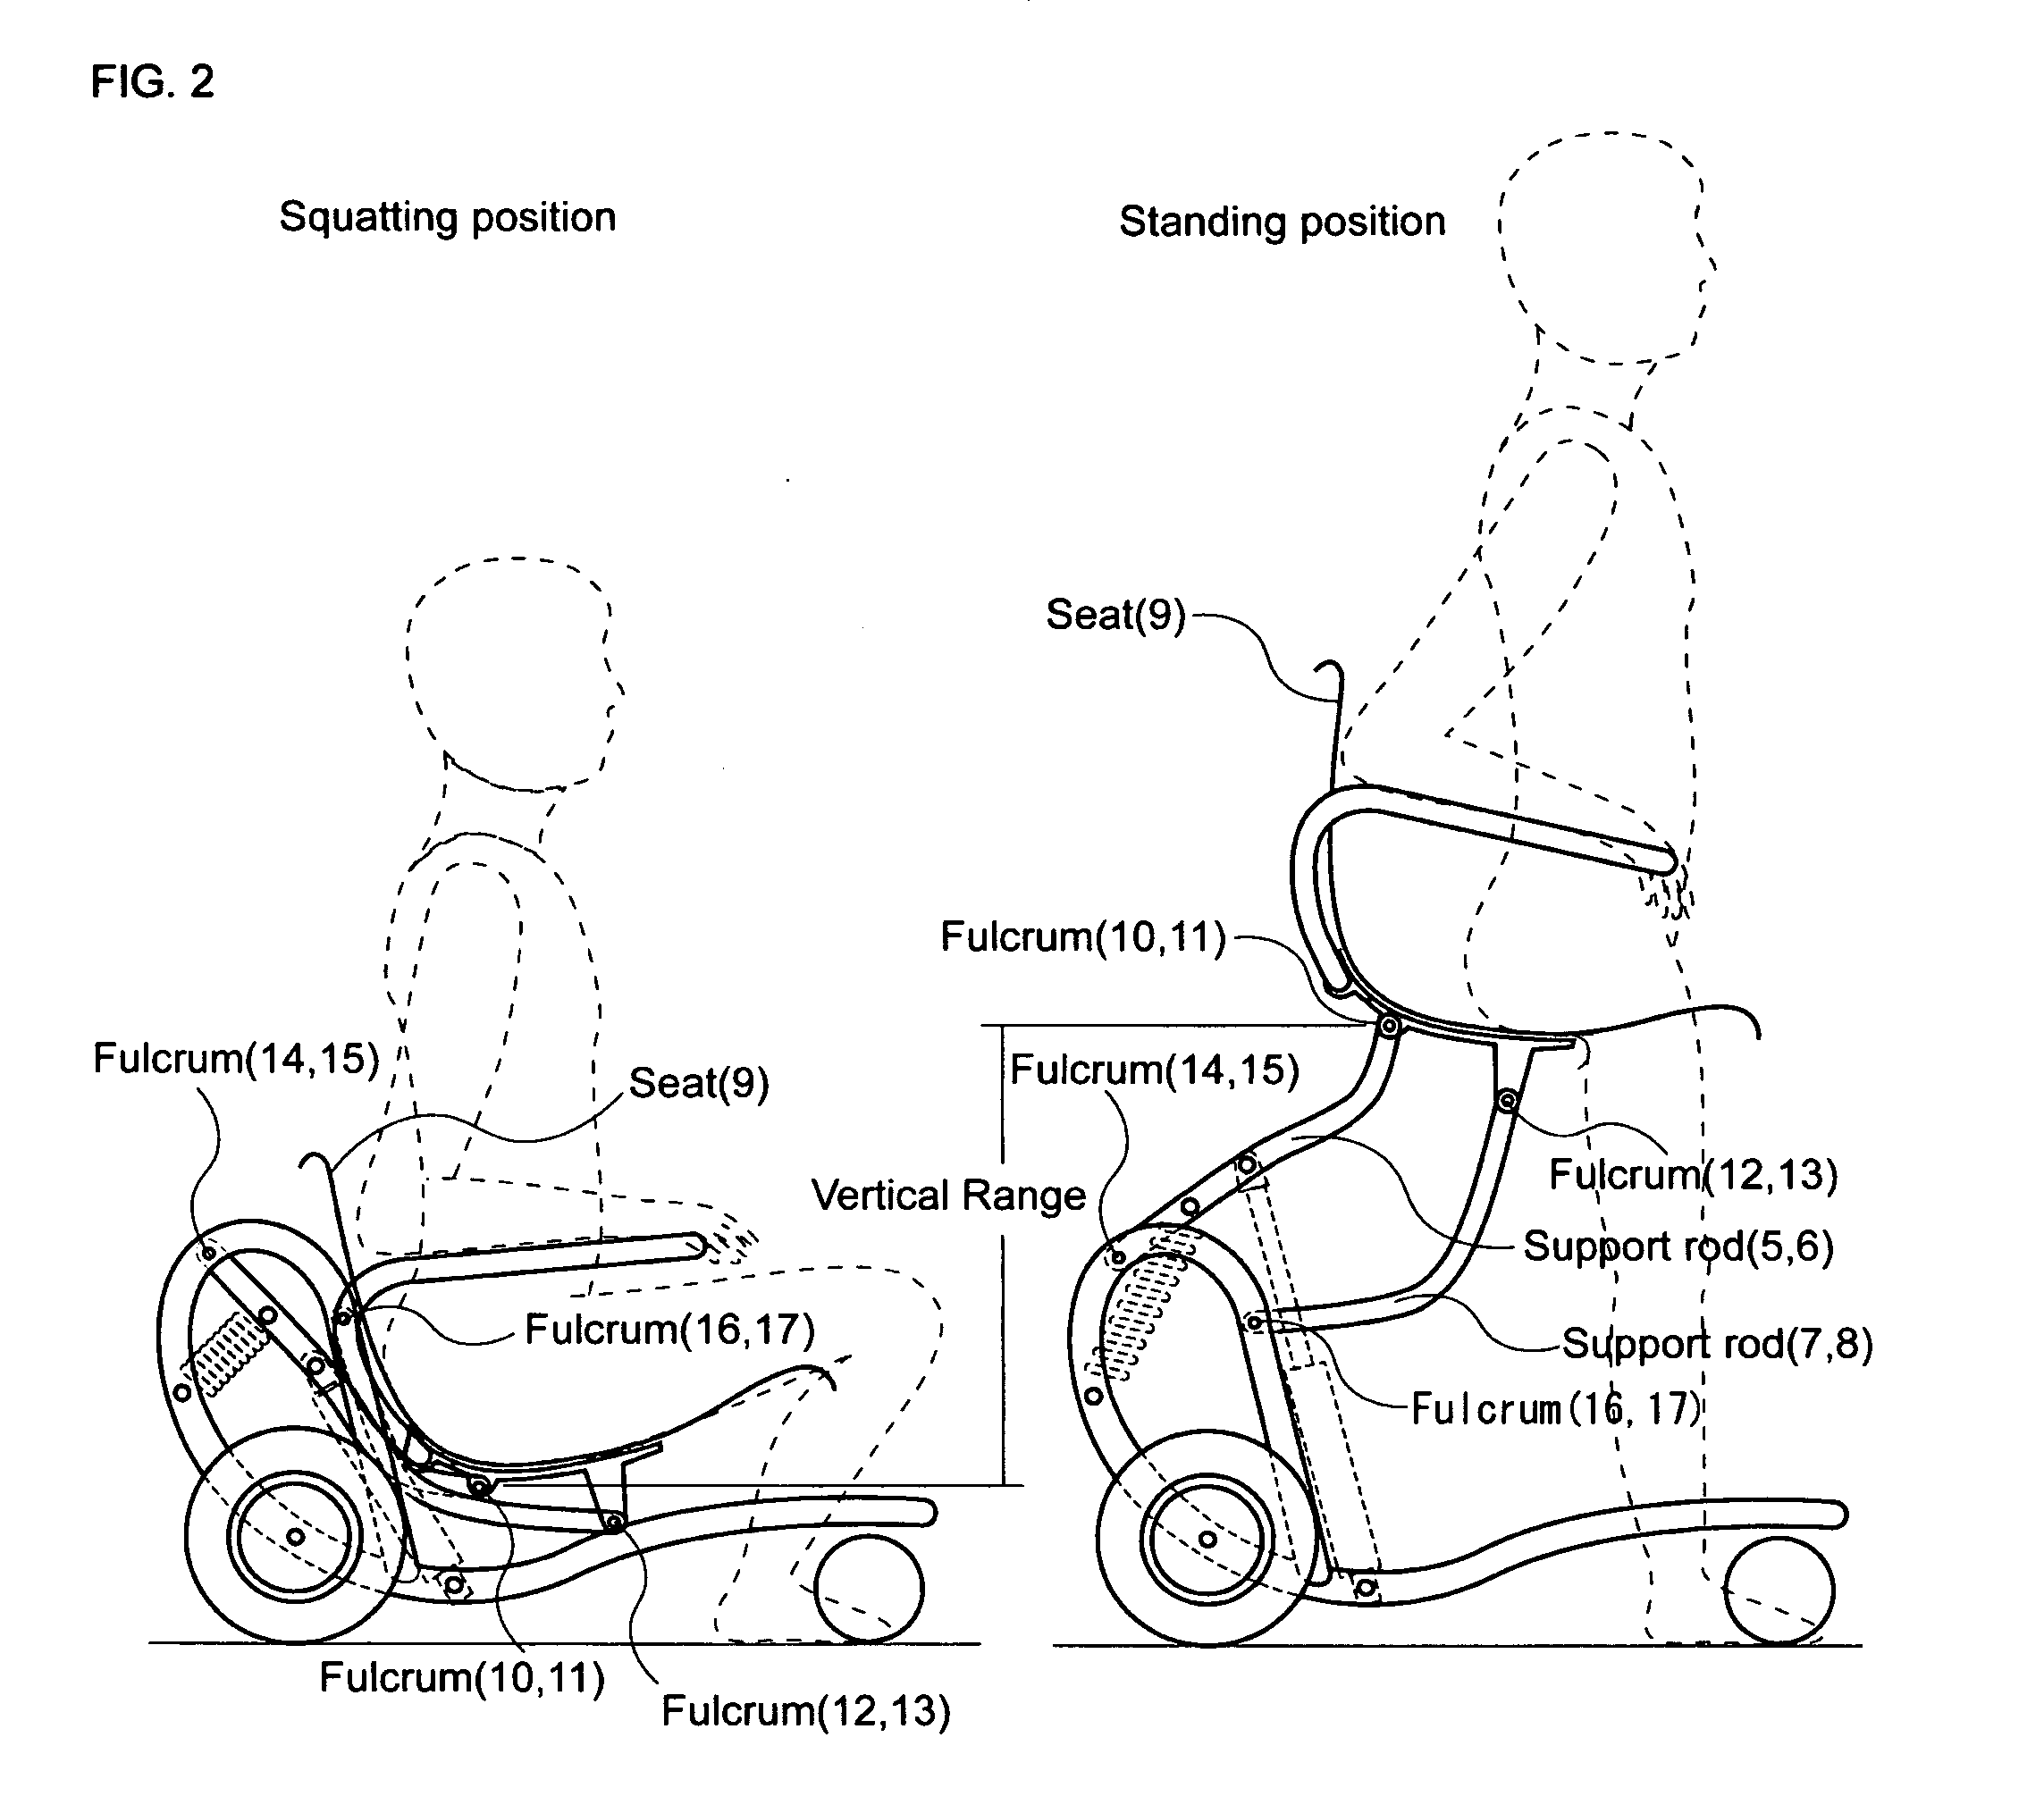 Electric wheelchair equipped with a raising/lowering function